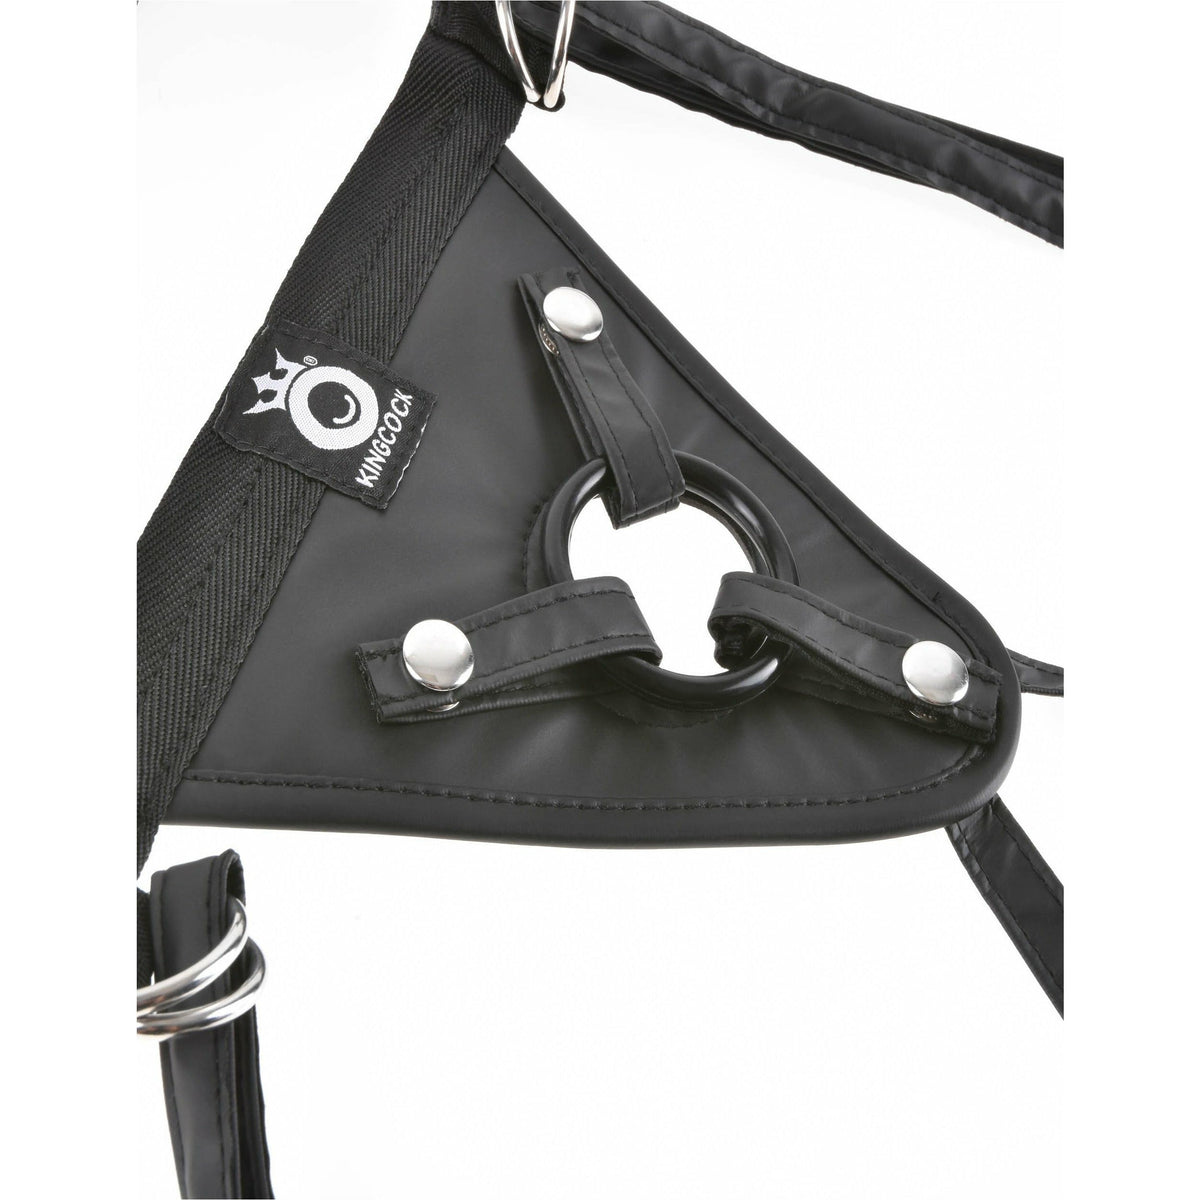 Pipedream Products King Cock Fit-Rite Harness